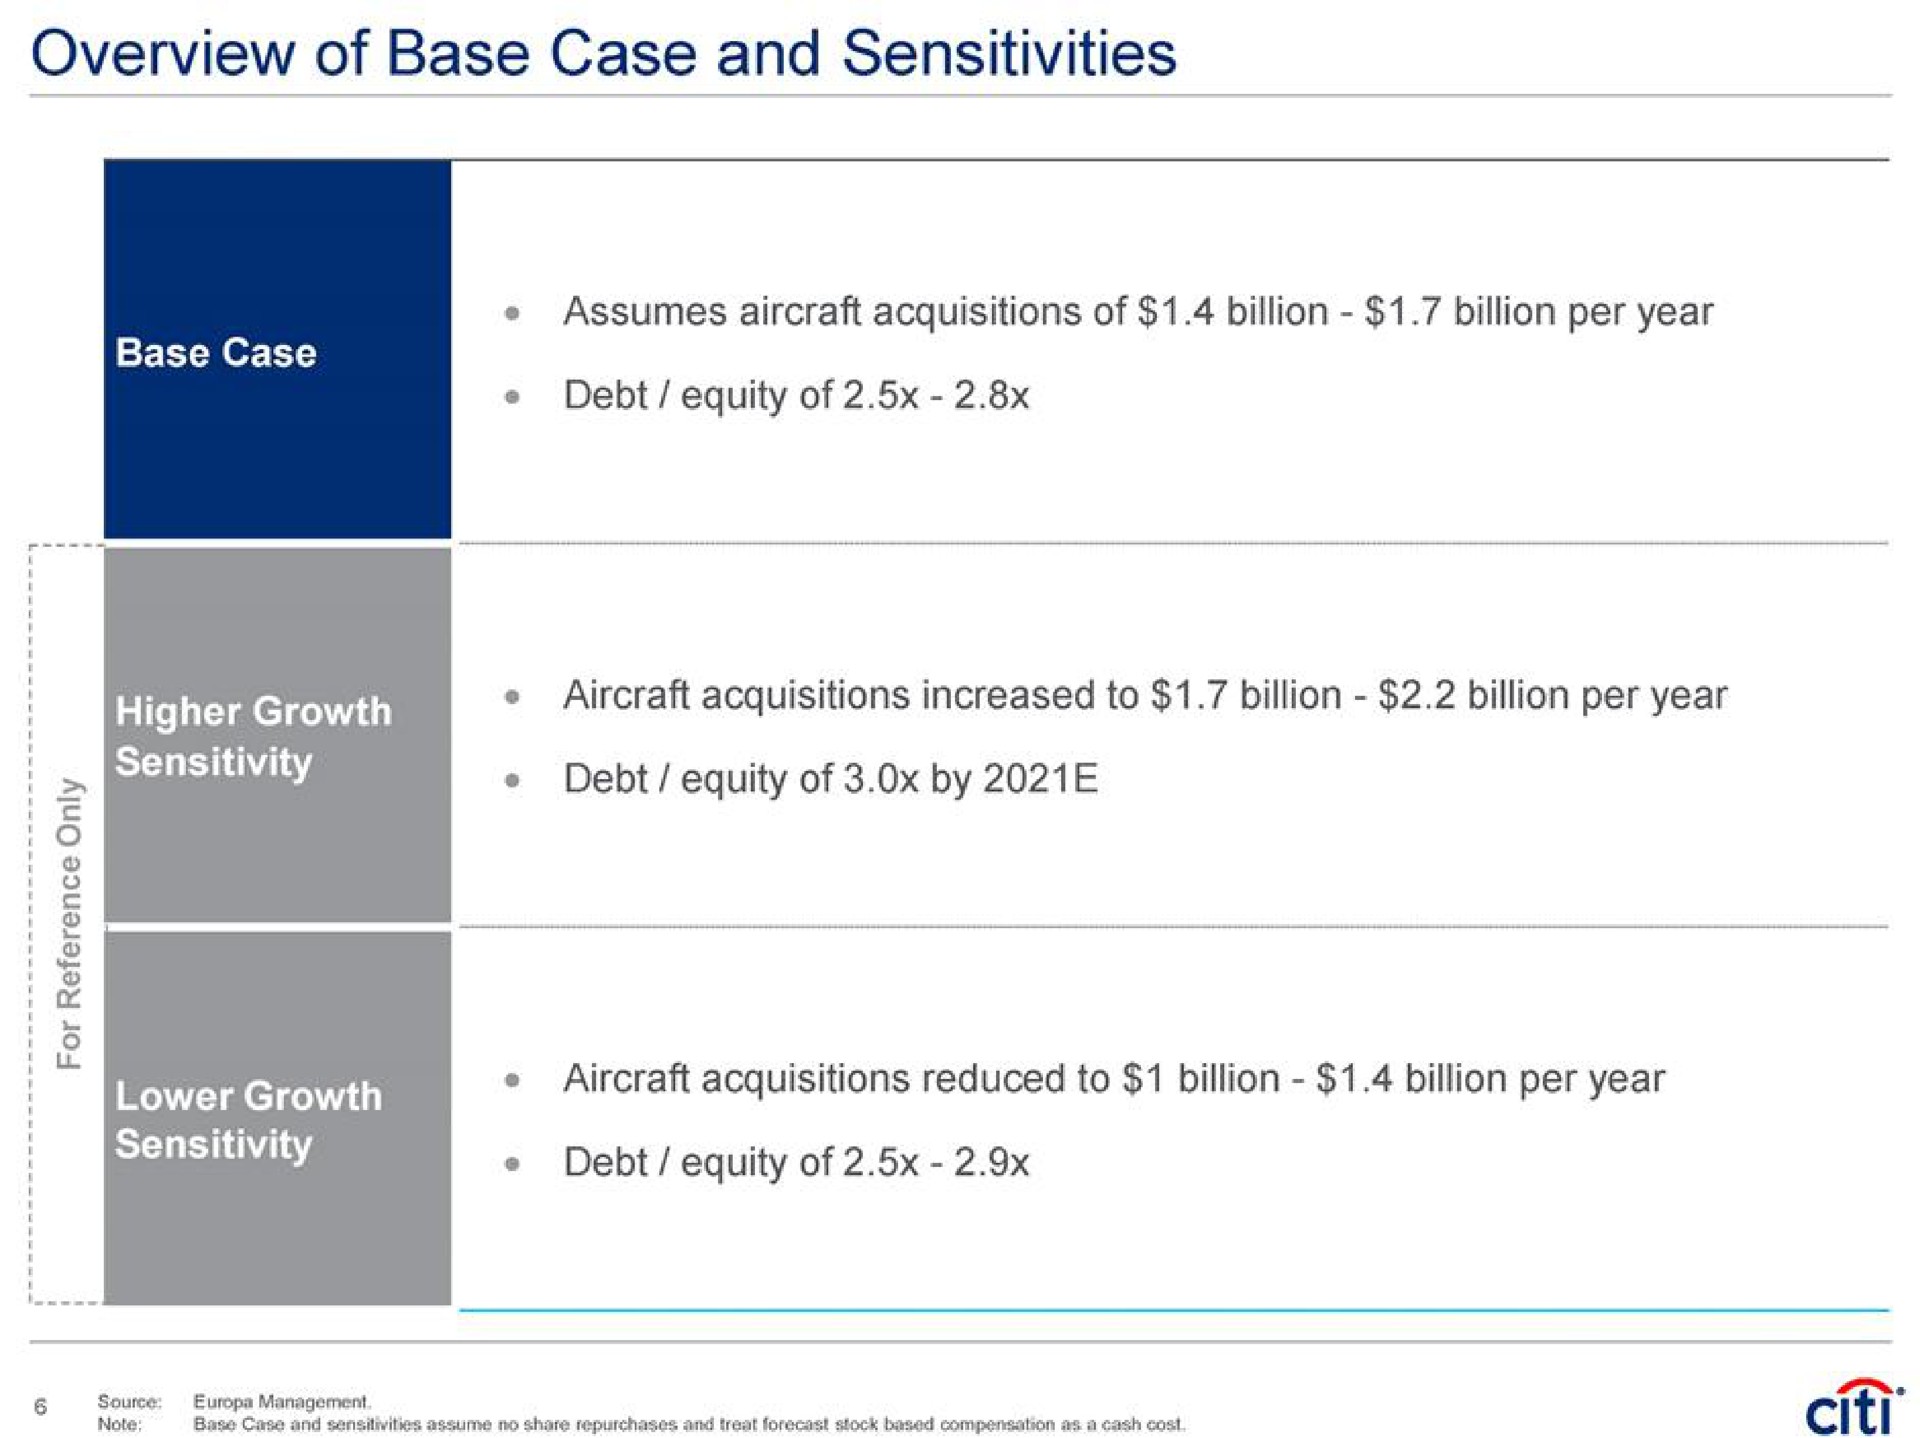 overview of base case and sensitivities base case higher growth sensitivity assumes aircraft acquisitions of billion billion per year debt equity of aircraft acquisitions increased to billion billion per year debt equity of by aircraft acquisitions reduced to billion billion per year debt equity of | Citi